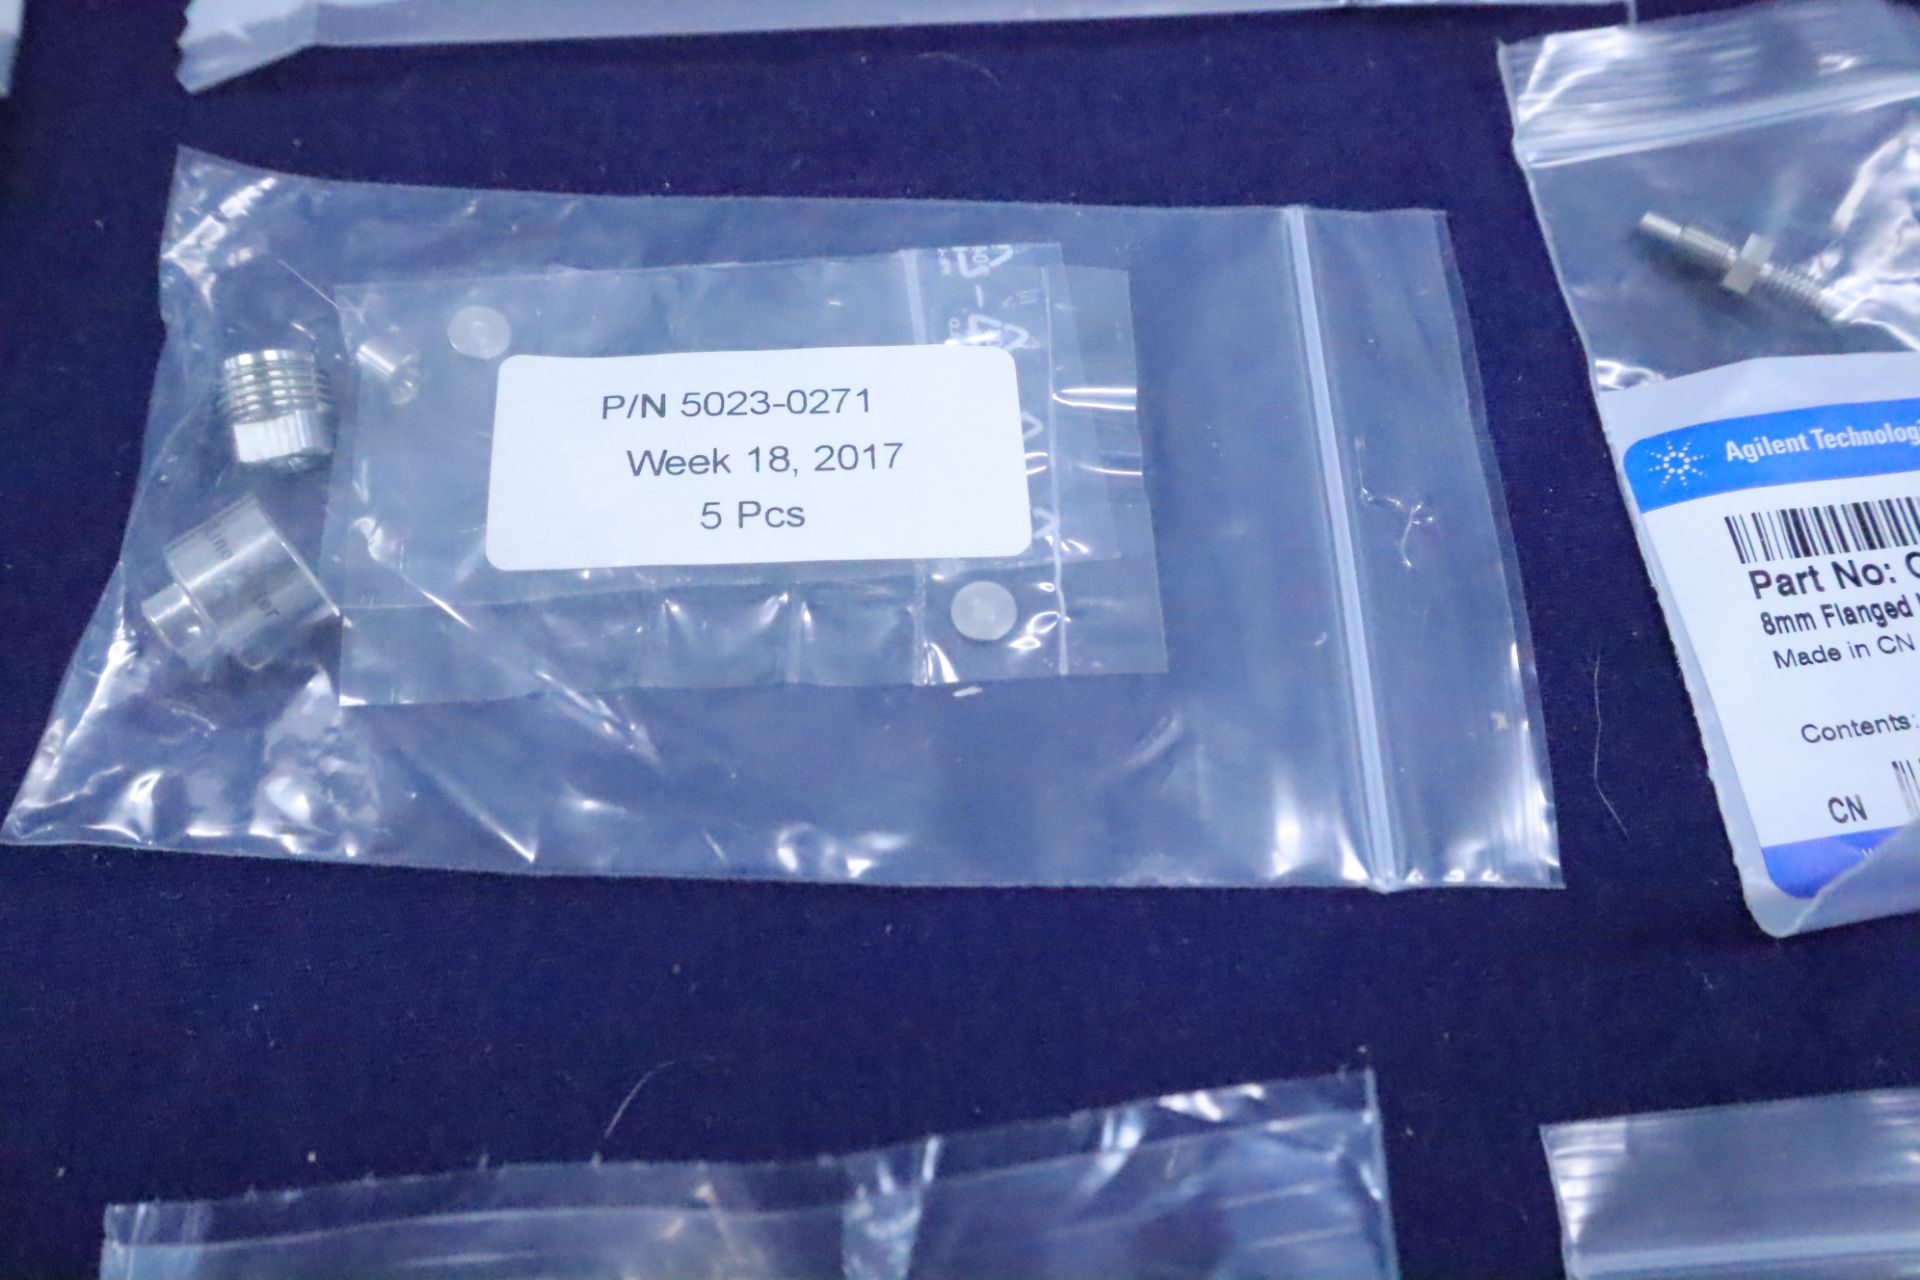 (NIB) Agilent Technologies OEM Replacement Parts for LC/MS Machines - Image 17 of 24